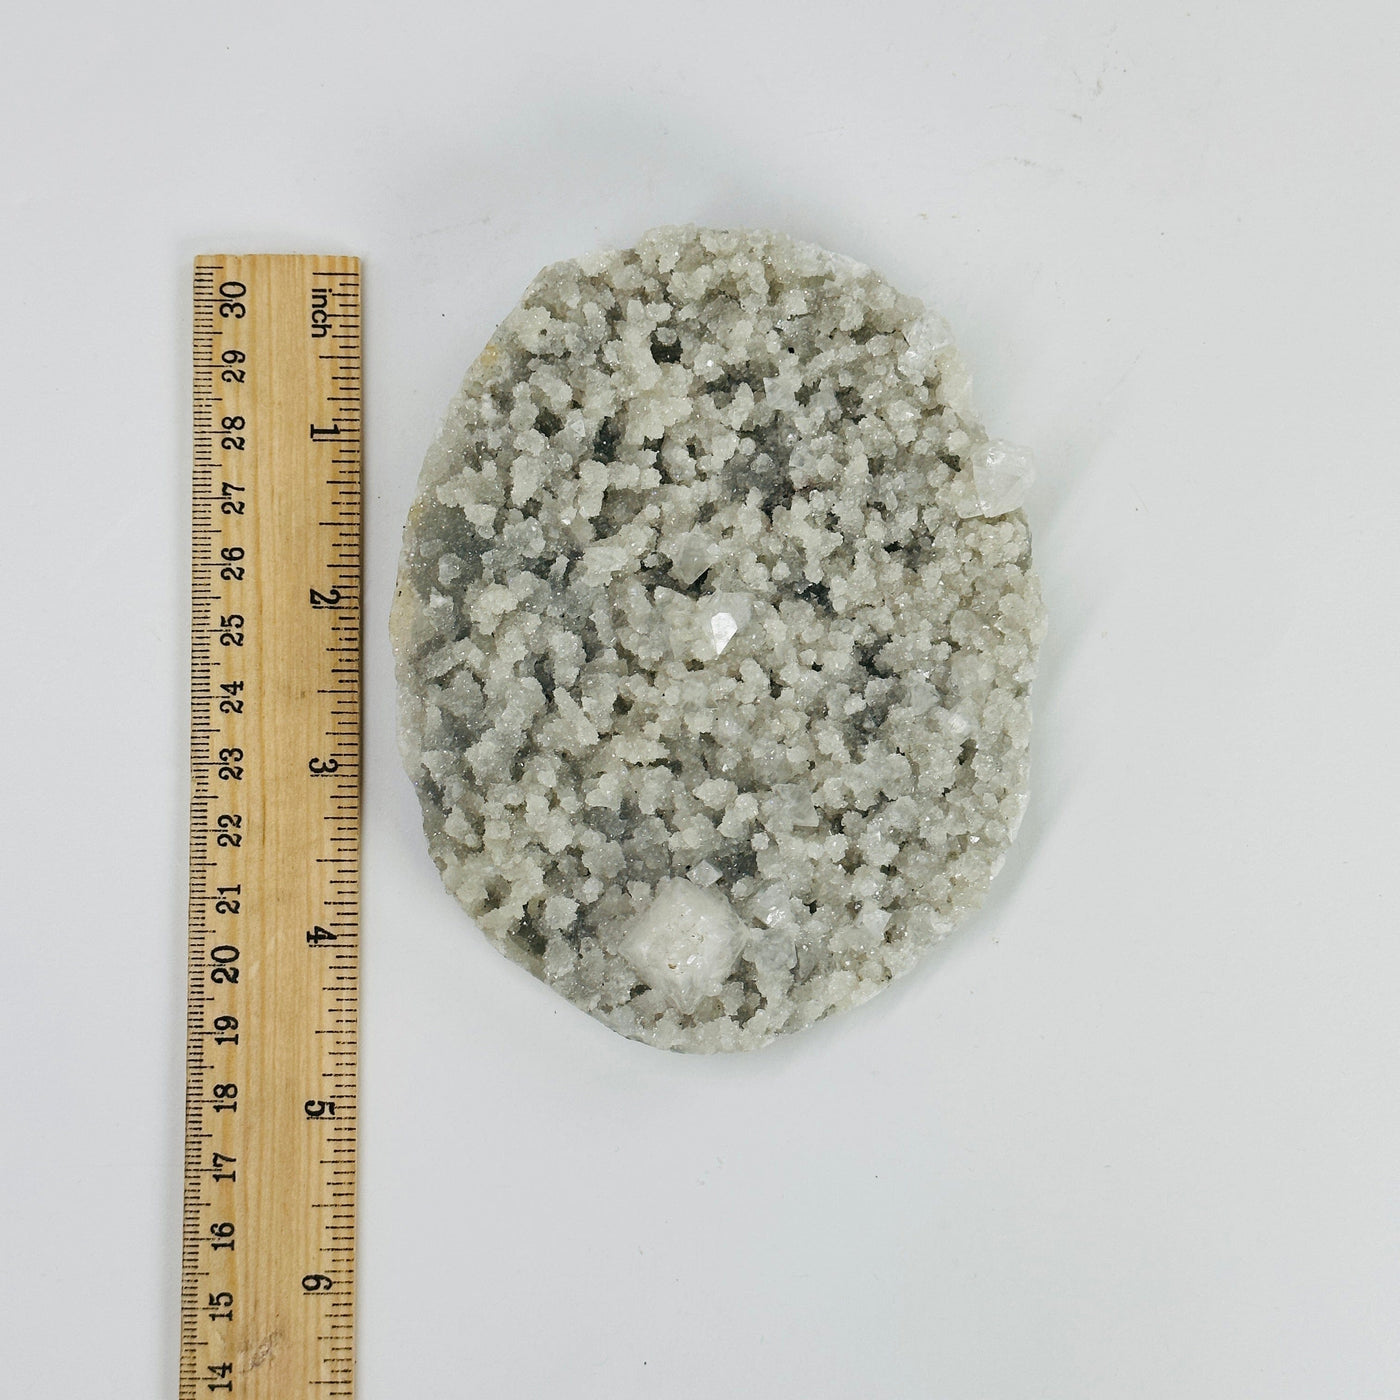 zeolite with apophyllite next to a ruler for size reference